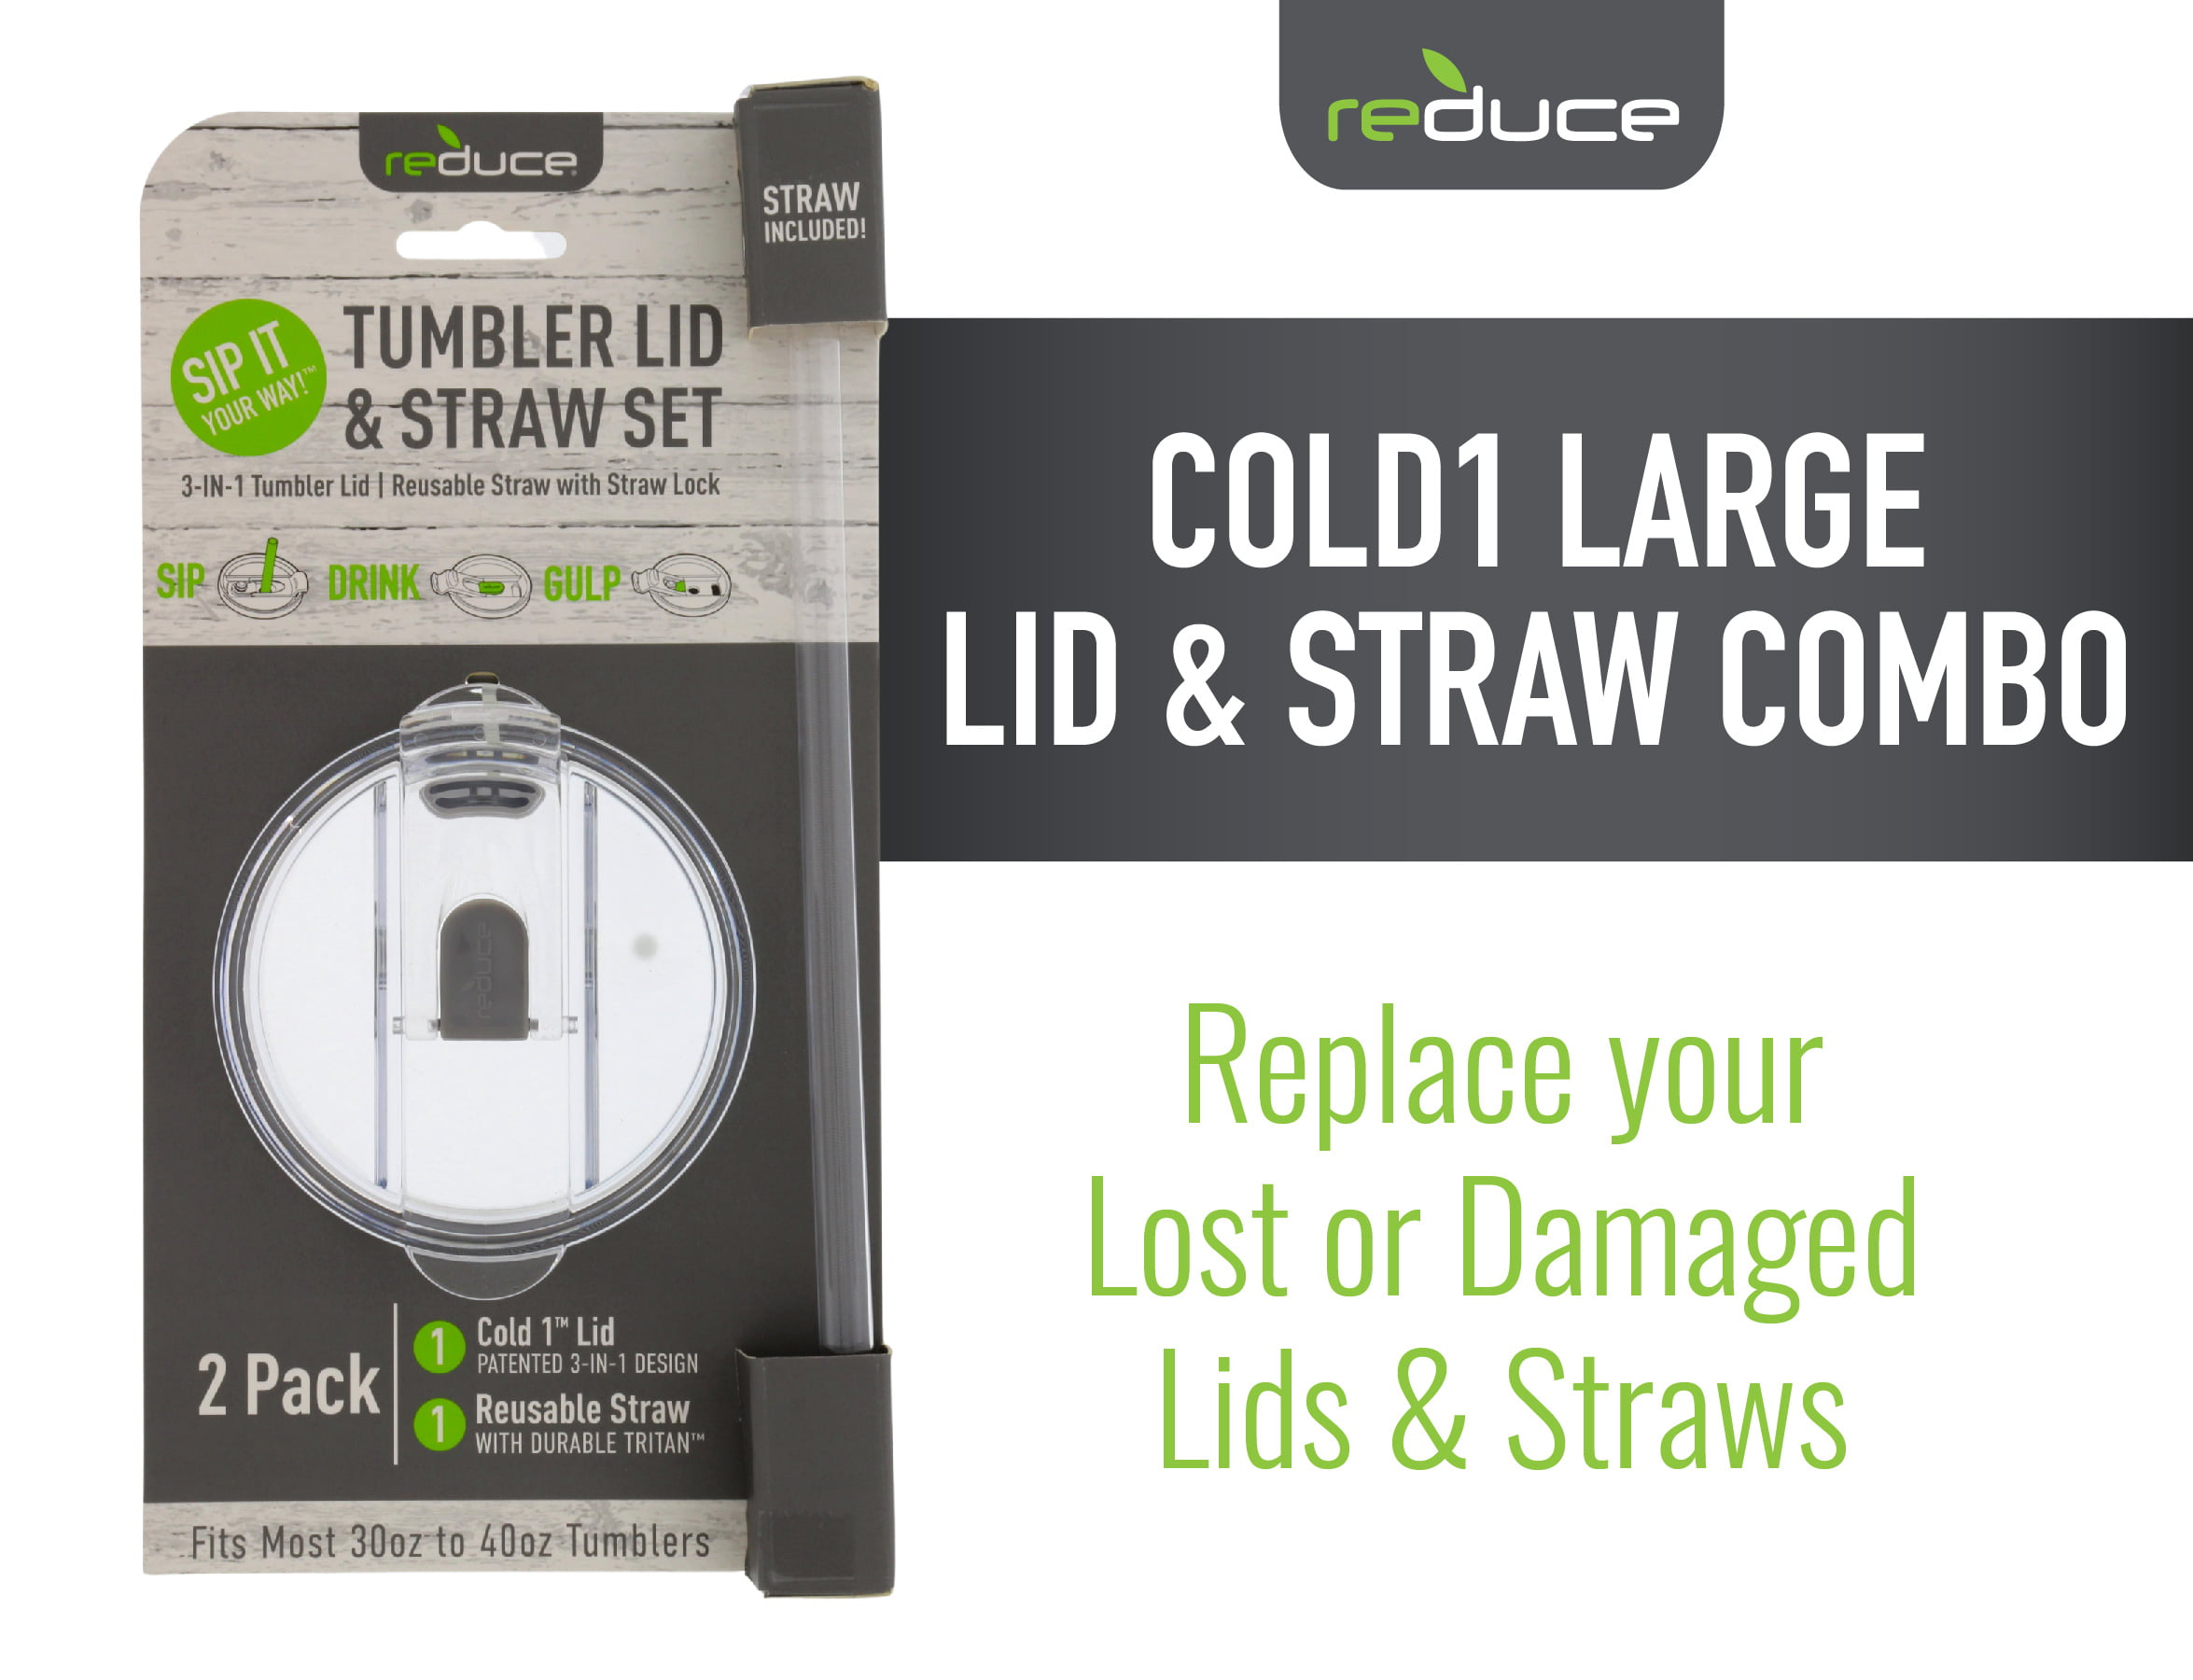  Reduce Reusable Straws - 4-Pack of BPA-Free Tumbler Straws,  Compatible with 14-18oz Tumblers, Hard Plastic Replacement Straws, Durable,  Dishwasher Safe - Ideal Drinking Straws for Home and Travel : Health 